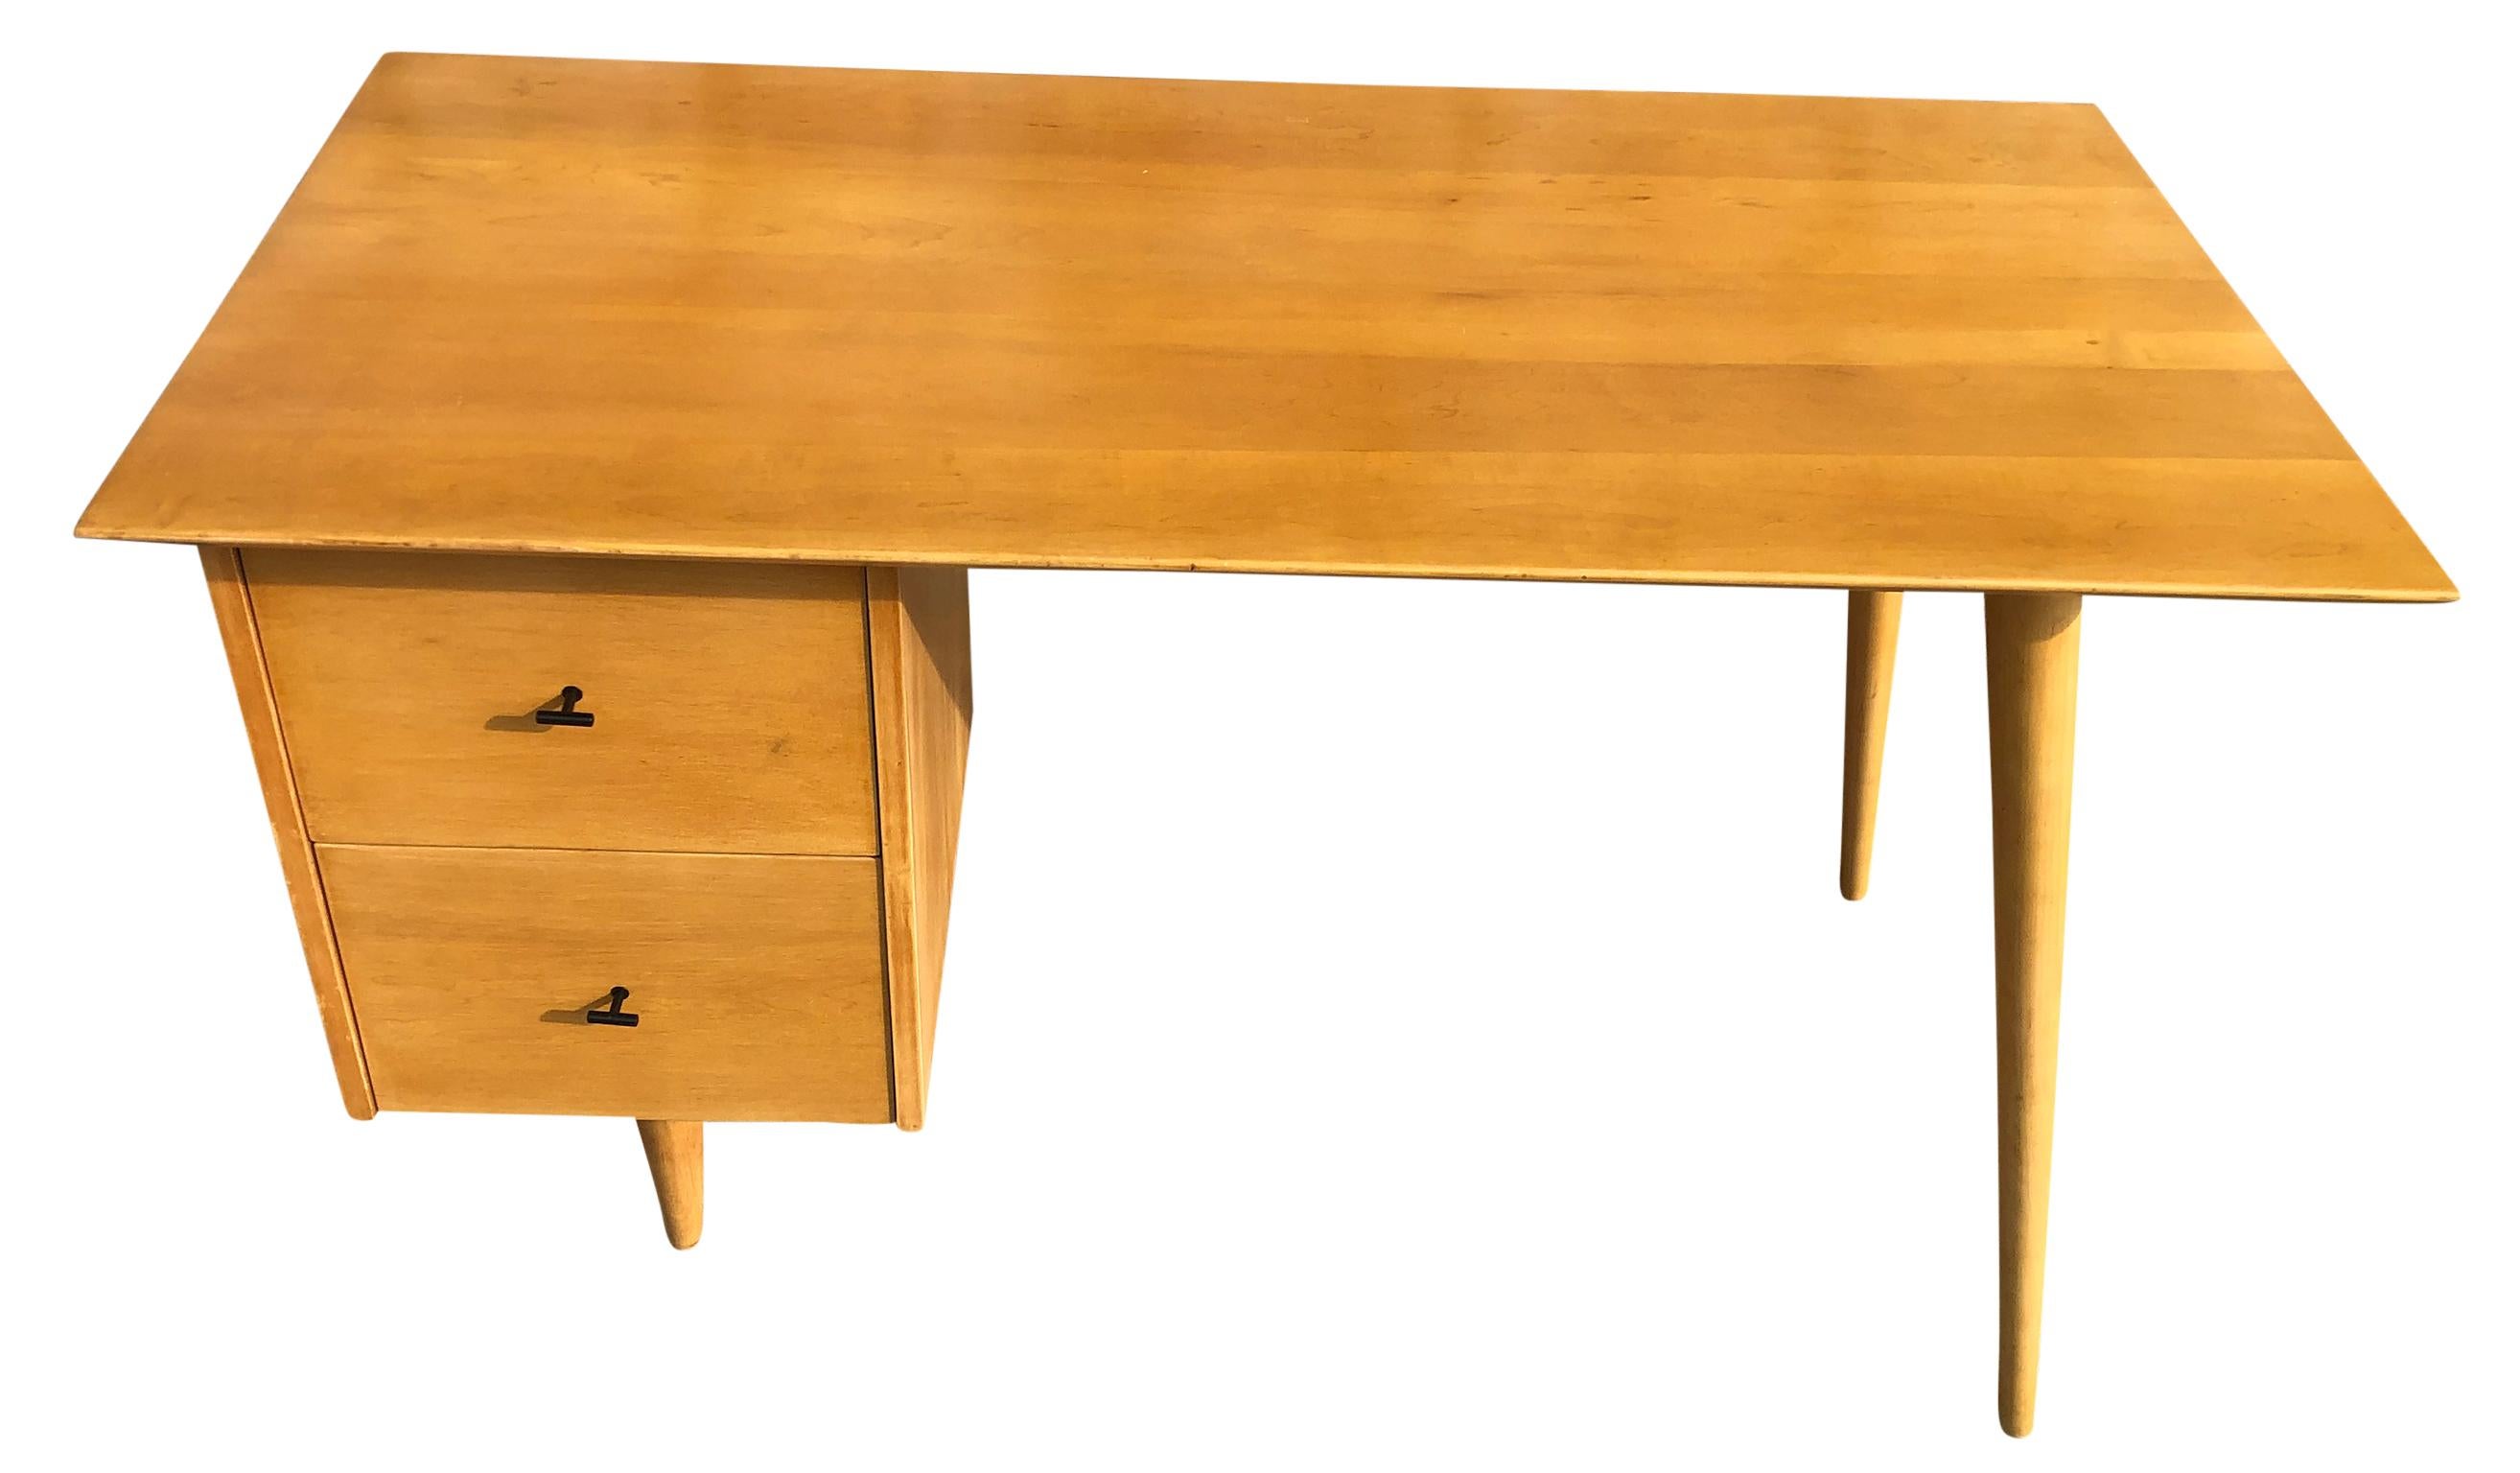 Beautiful Paul McCobb Planner Group #1560 double drawer desk blonde maple finish T-pulls solid maple. Desk is in Great original vintage condition. Very beautiful designed desk on tapered legs - all solid maple. Designers by Paul McCobb - Built by